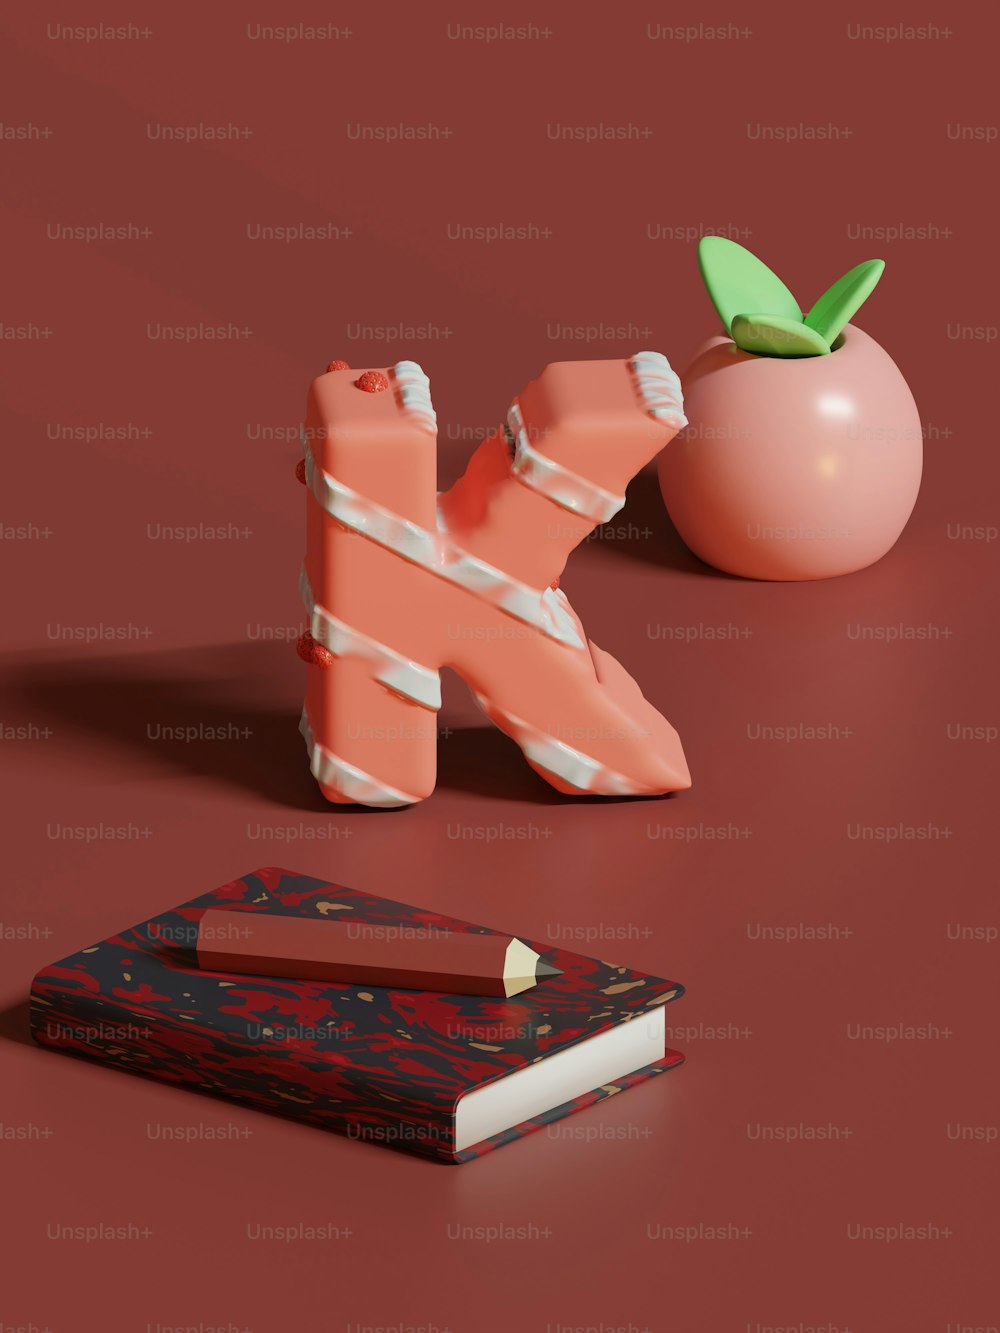 a book, a pencil holder, and an apple sit on a red surface